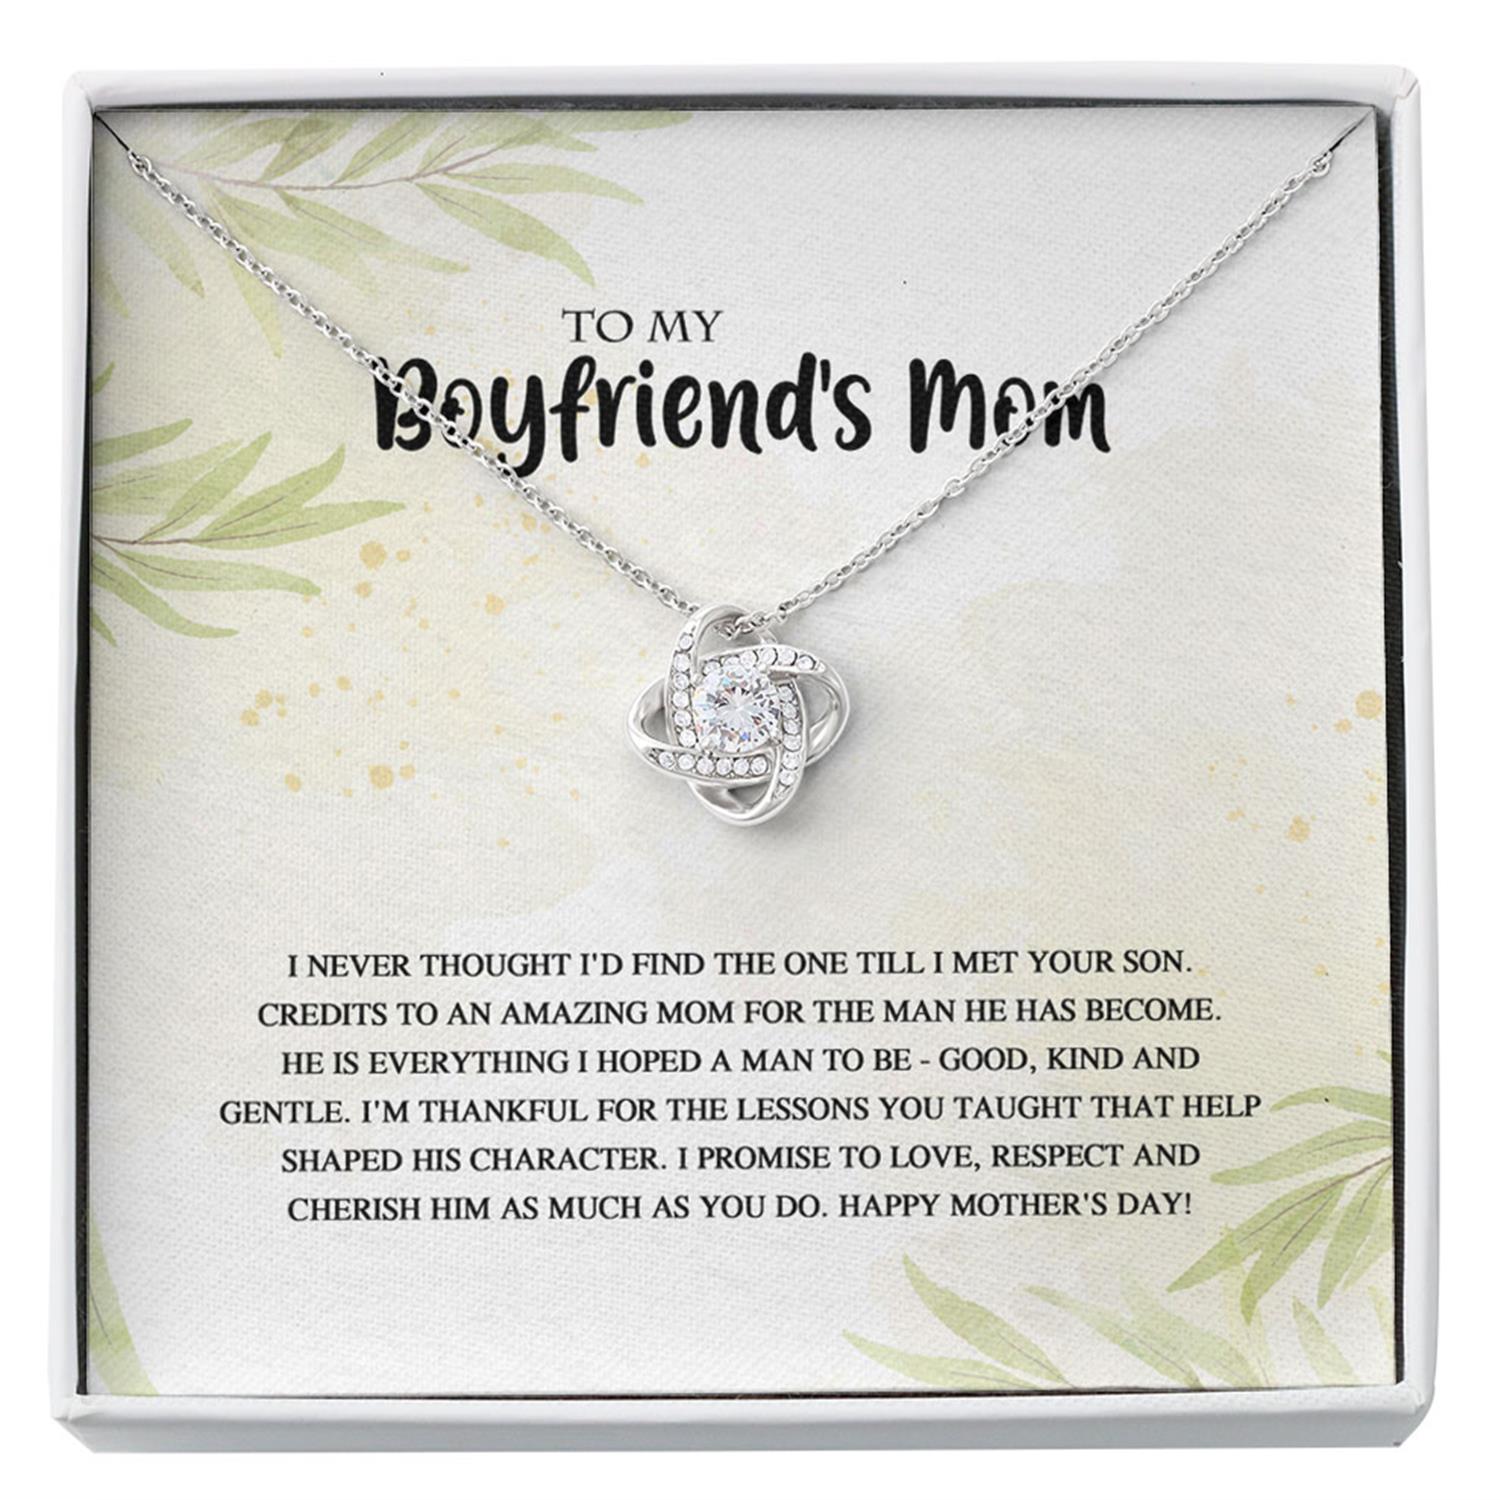 Mom Necklace, Mother-in-law Necklace, Boyfriend's Mom Necklace, Presents For Mother Gifts, Amazing Good Kind Custom Necklace